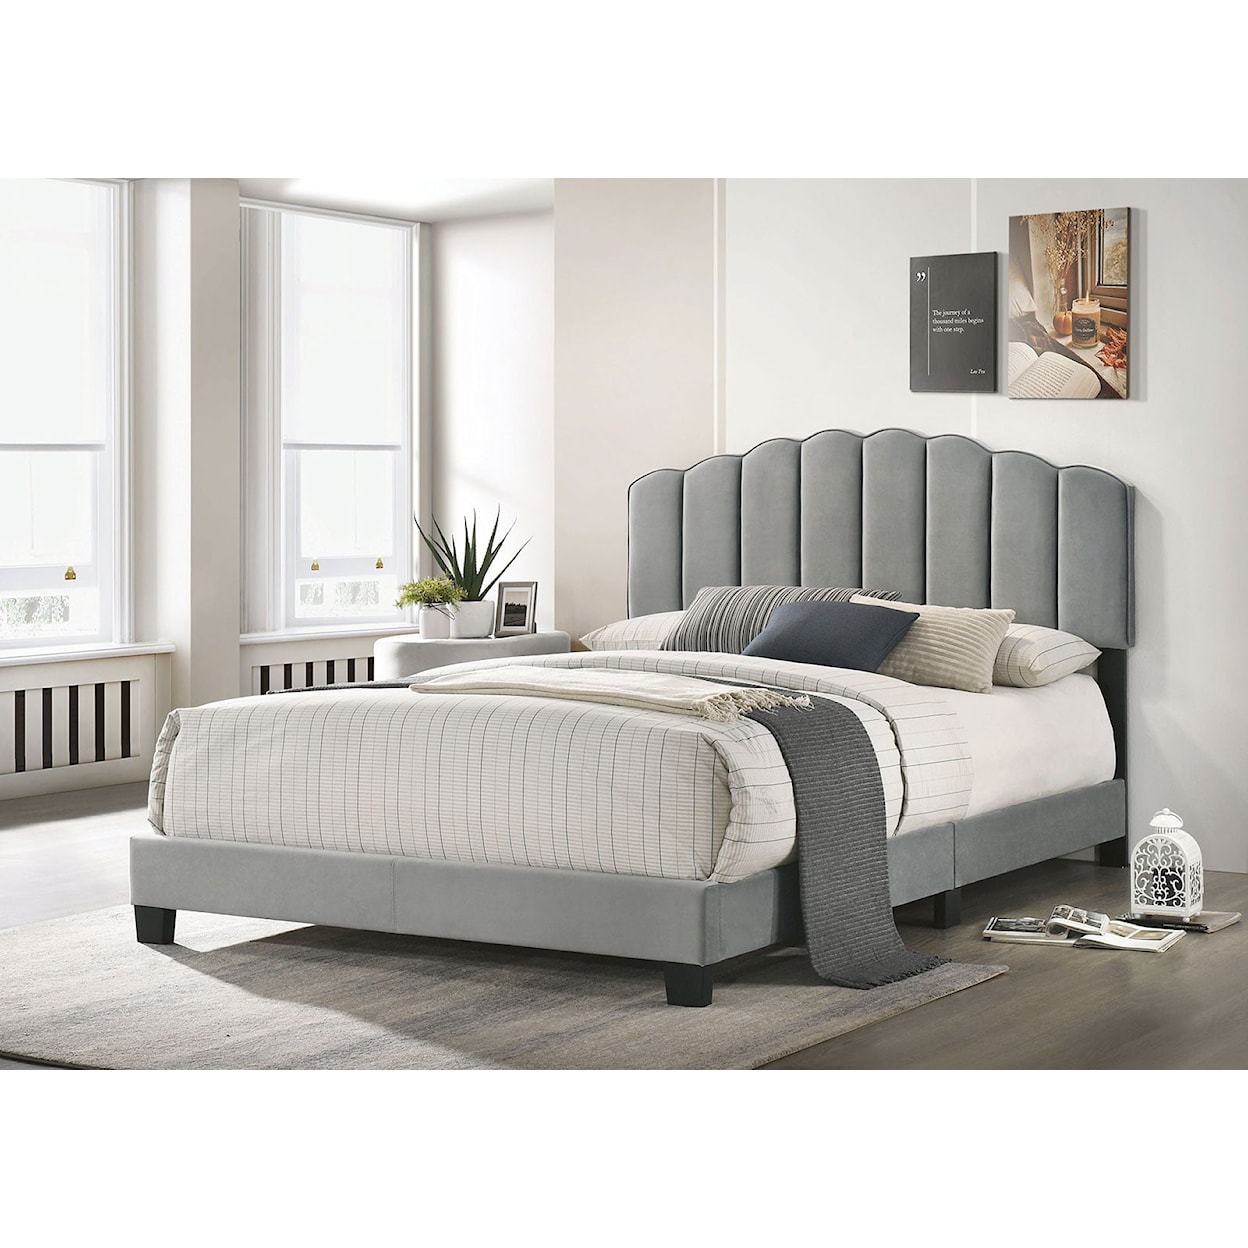 Furniture of America Nerina King Bed